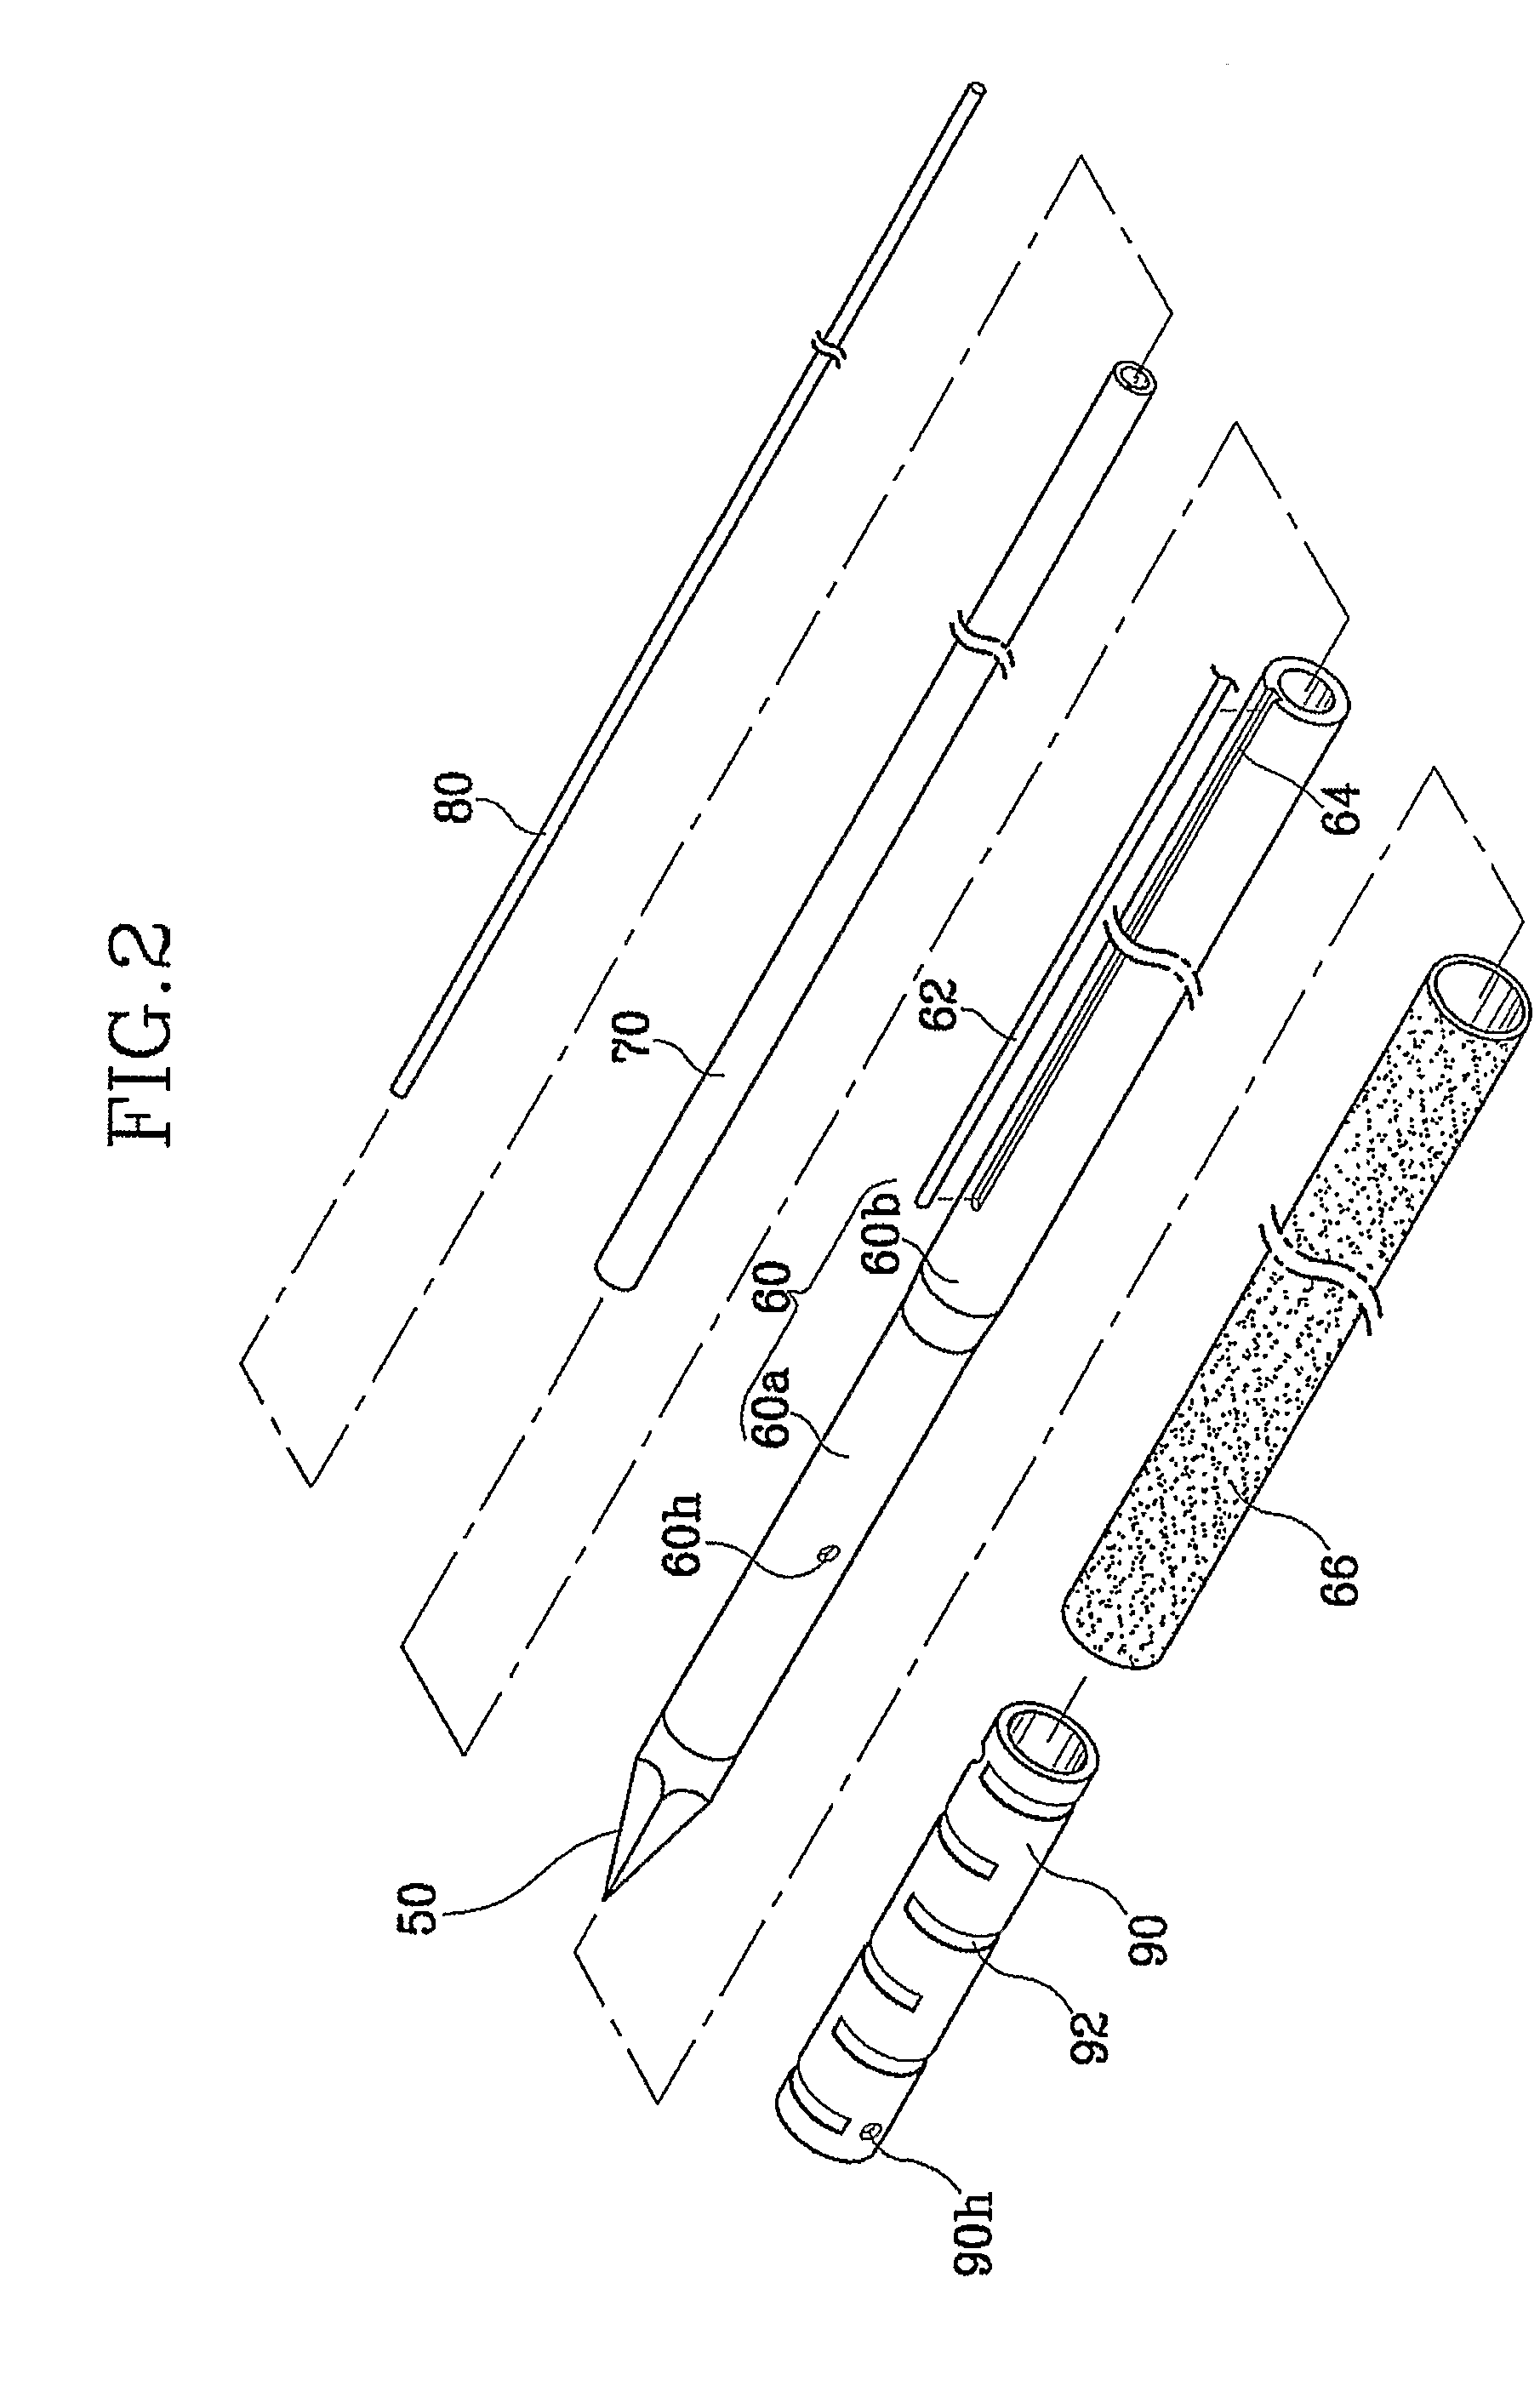 Electrode for Radiofrequency Tissue Ablation